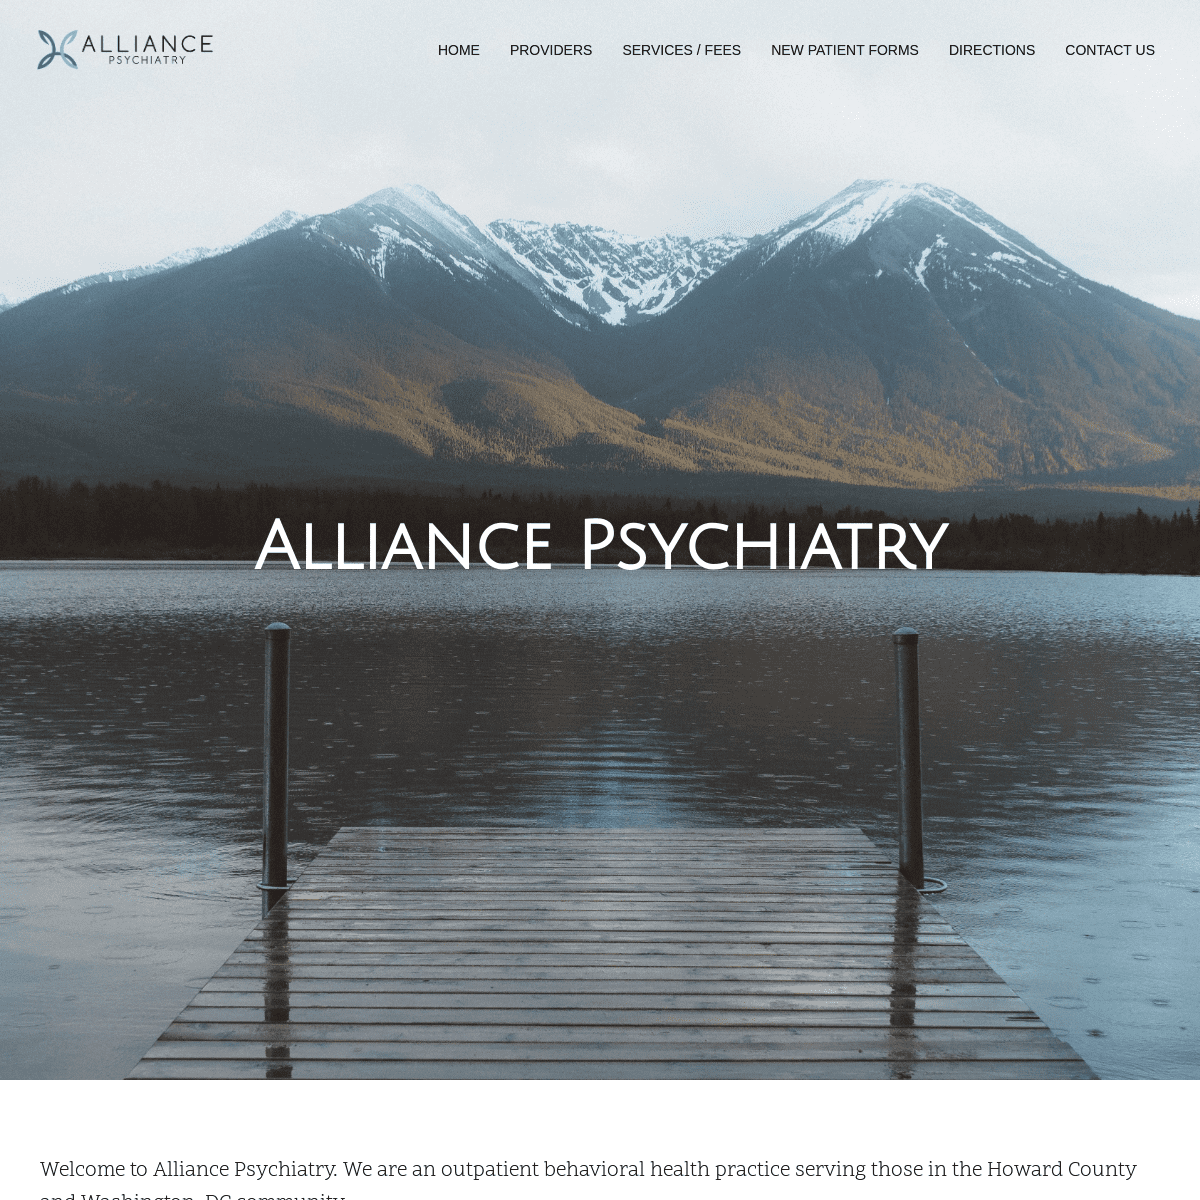 A complete backup of alliance-psychiatry.com